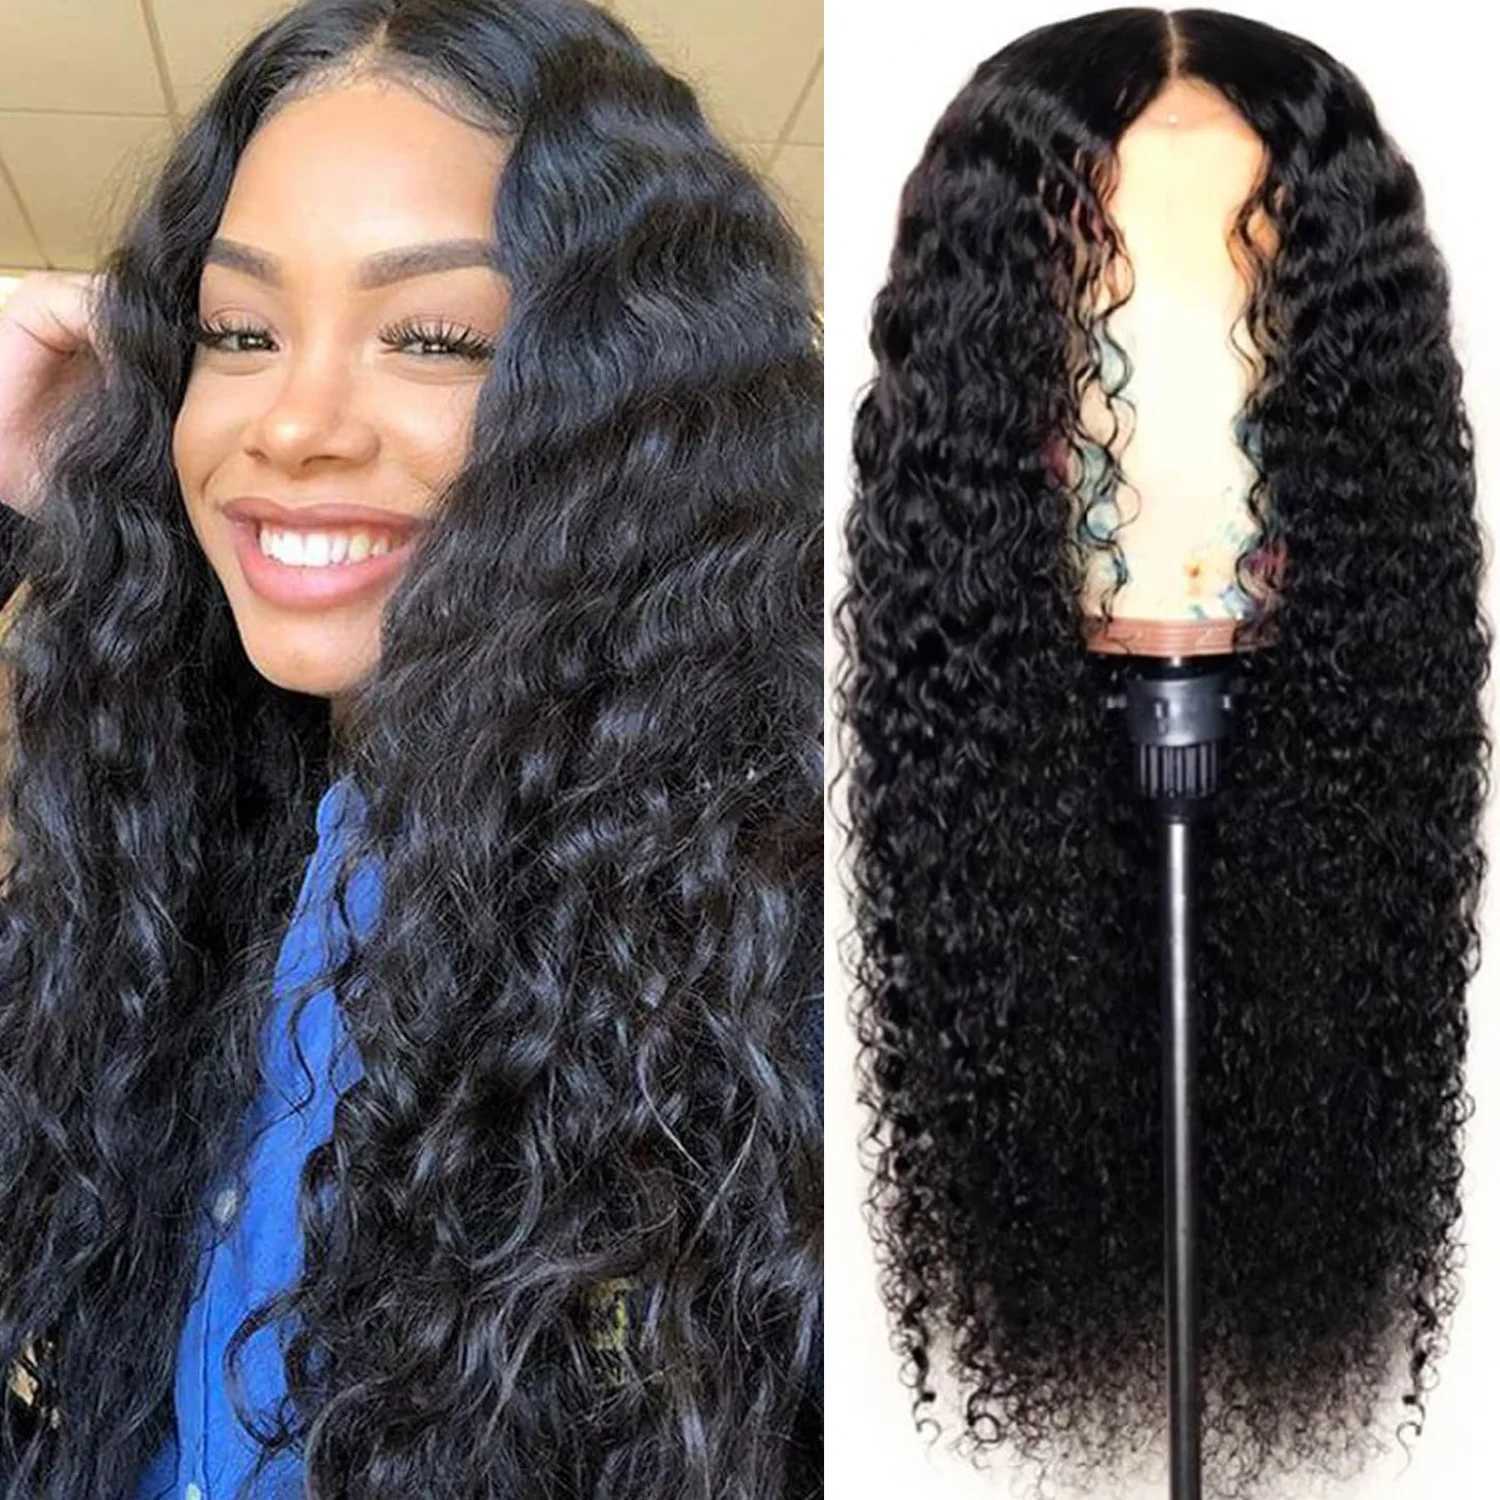 Synthetic Wigs Synthetic Long Black Corn Perm Curly Hair Small African Wig High-Density Simulation Of The Natural Color Black Women Curly Wig 240328 240327